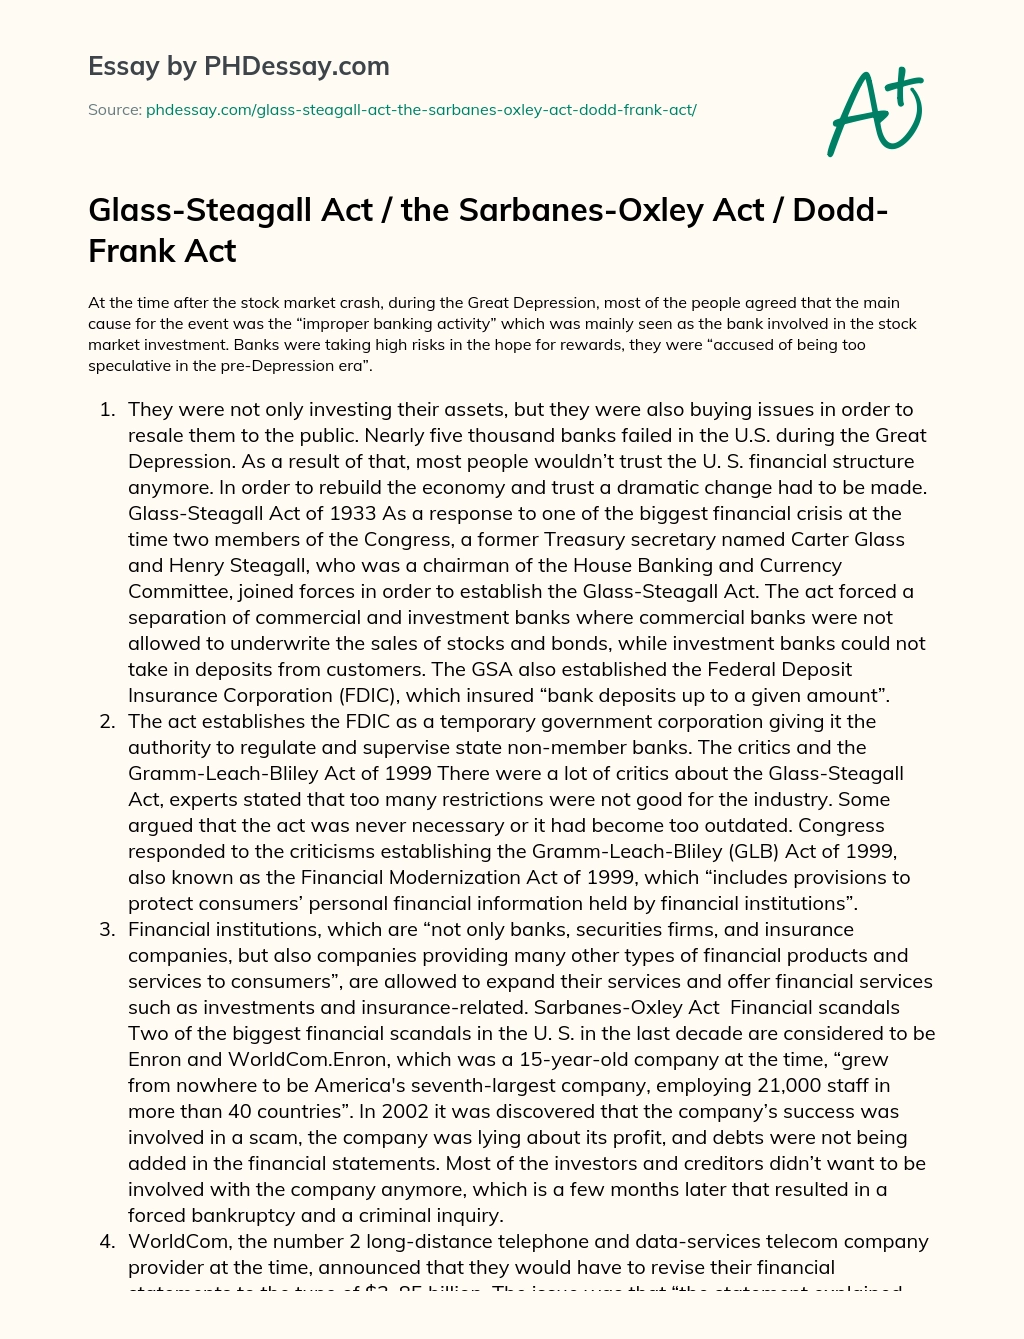 Glass-Steagall Act / the Sarbanes-Oxley Act / Dodd-Frank Act essay